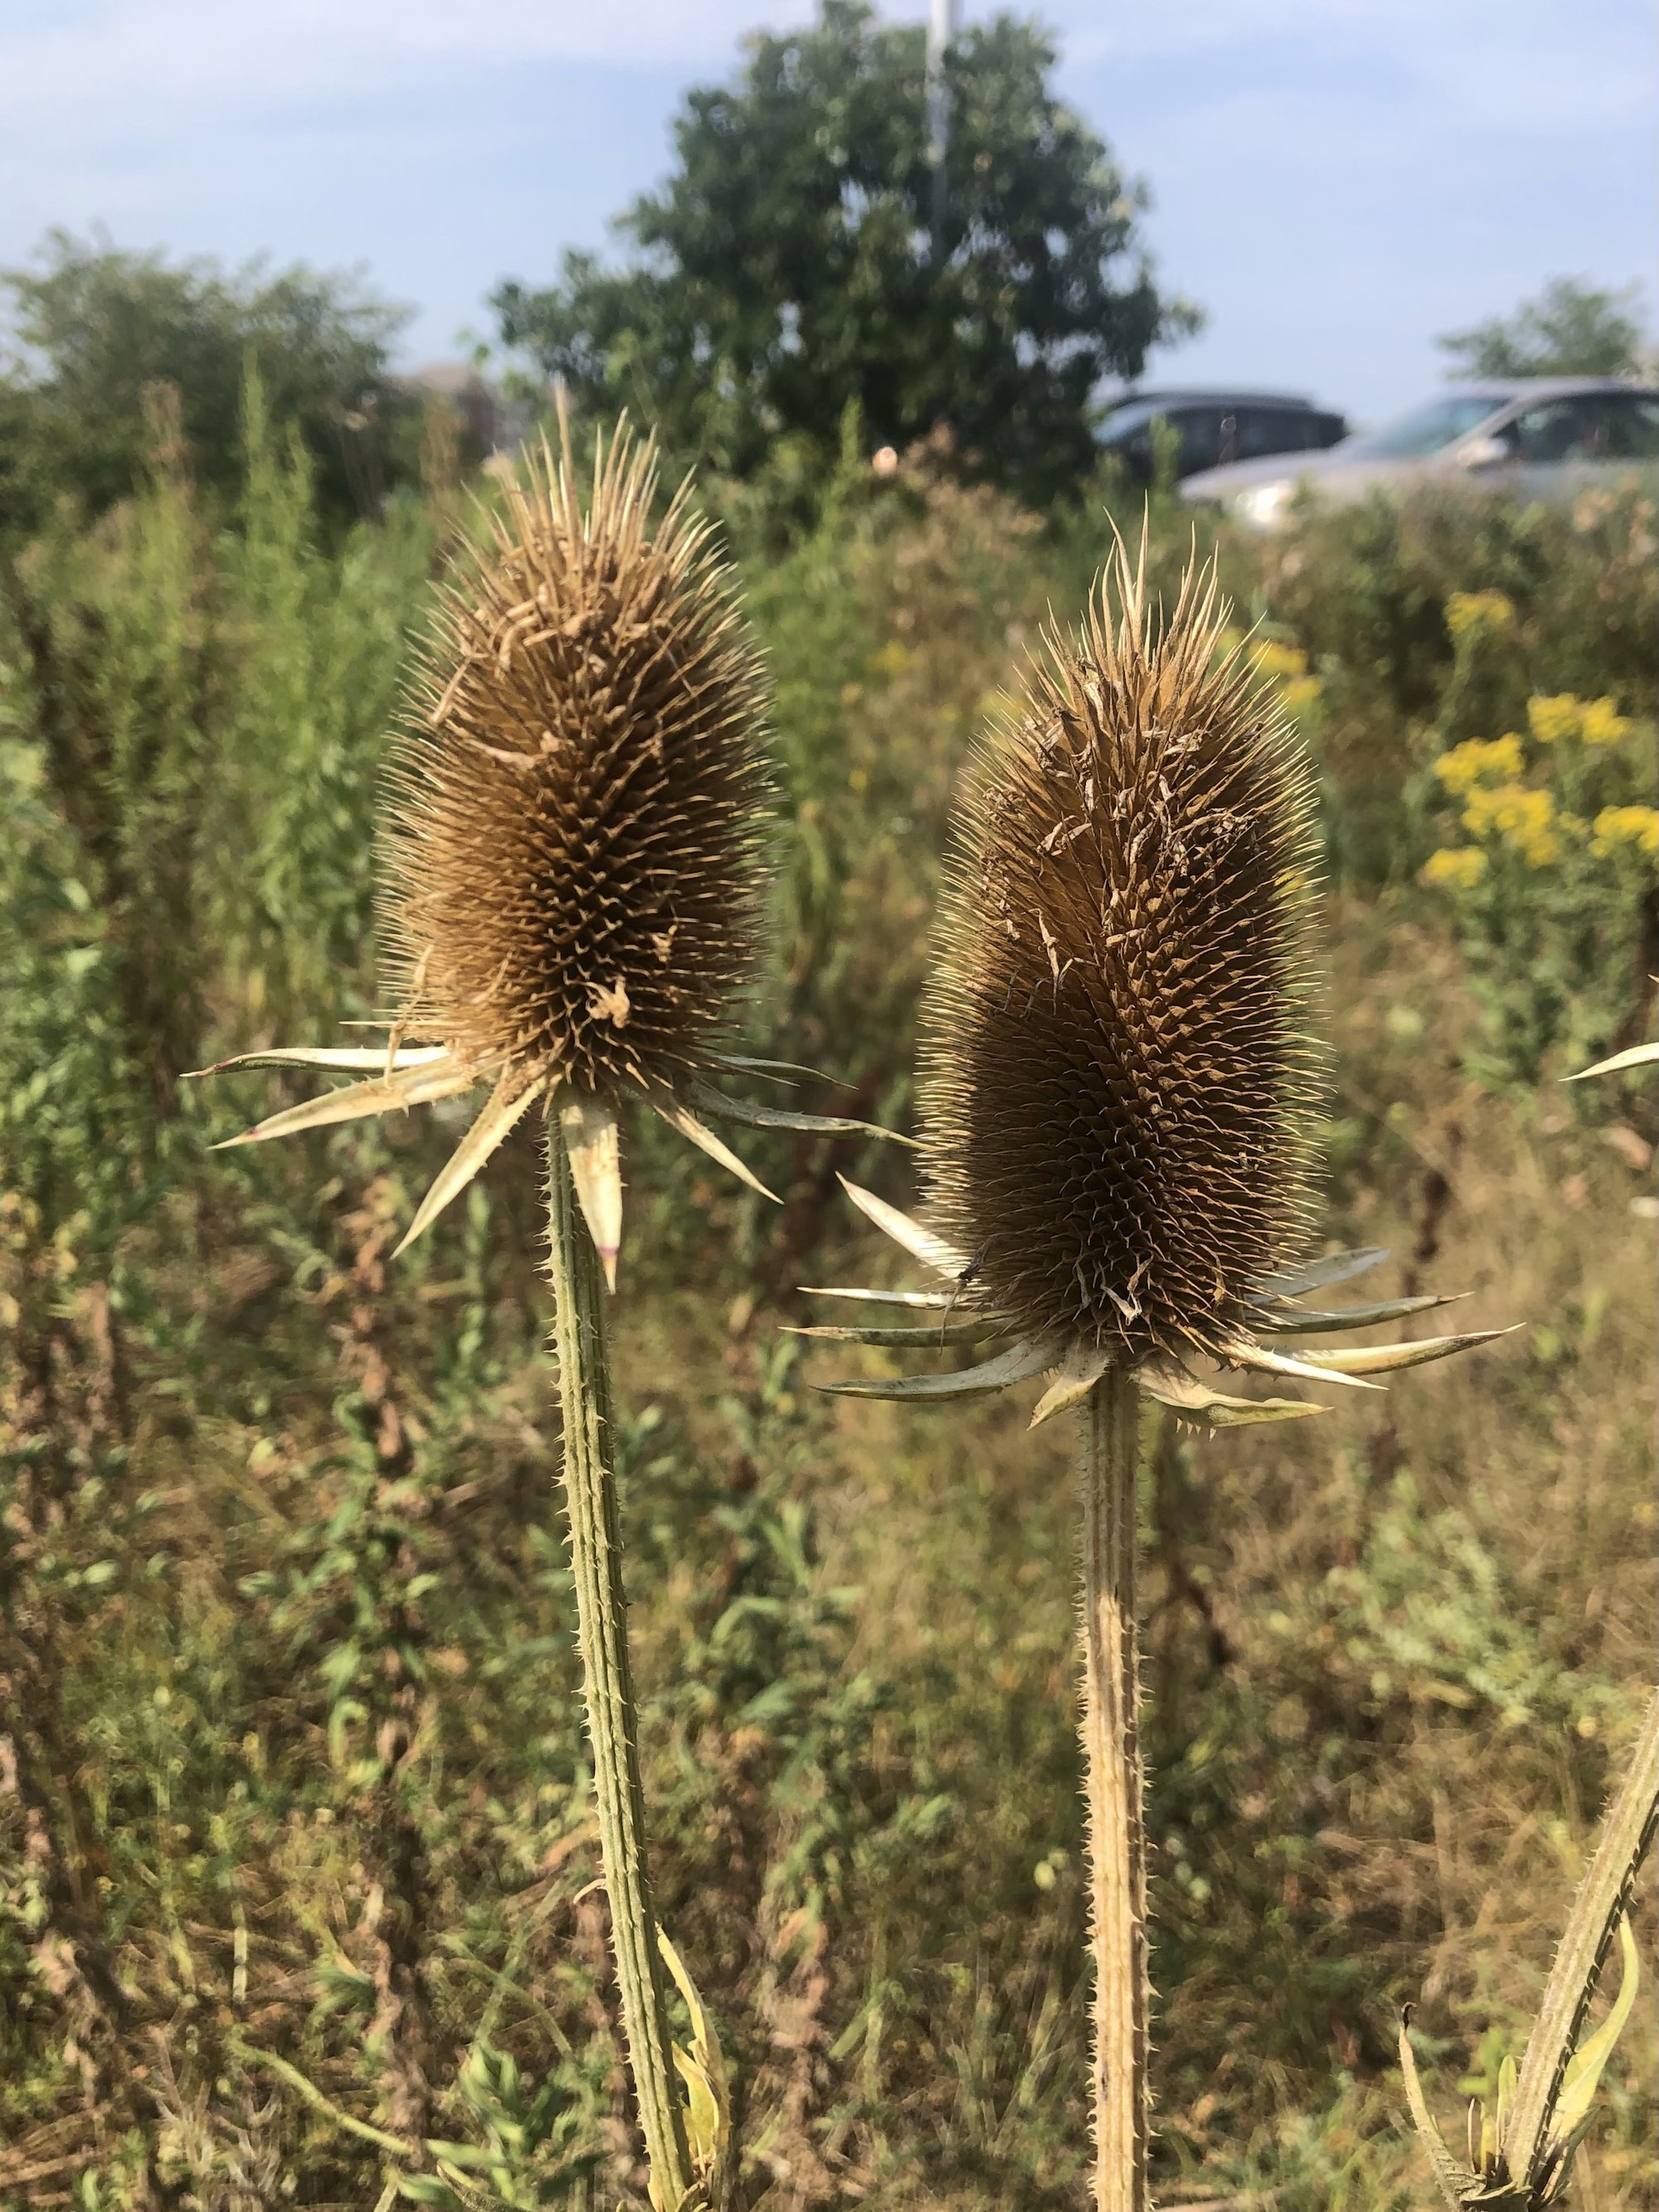 Cutleaf Teasel in wild area between GHC Hatchery Hill Clinic parking lot and Cahill Main Road in Madison, Wisconsin on August 5, 2021.